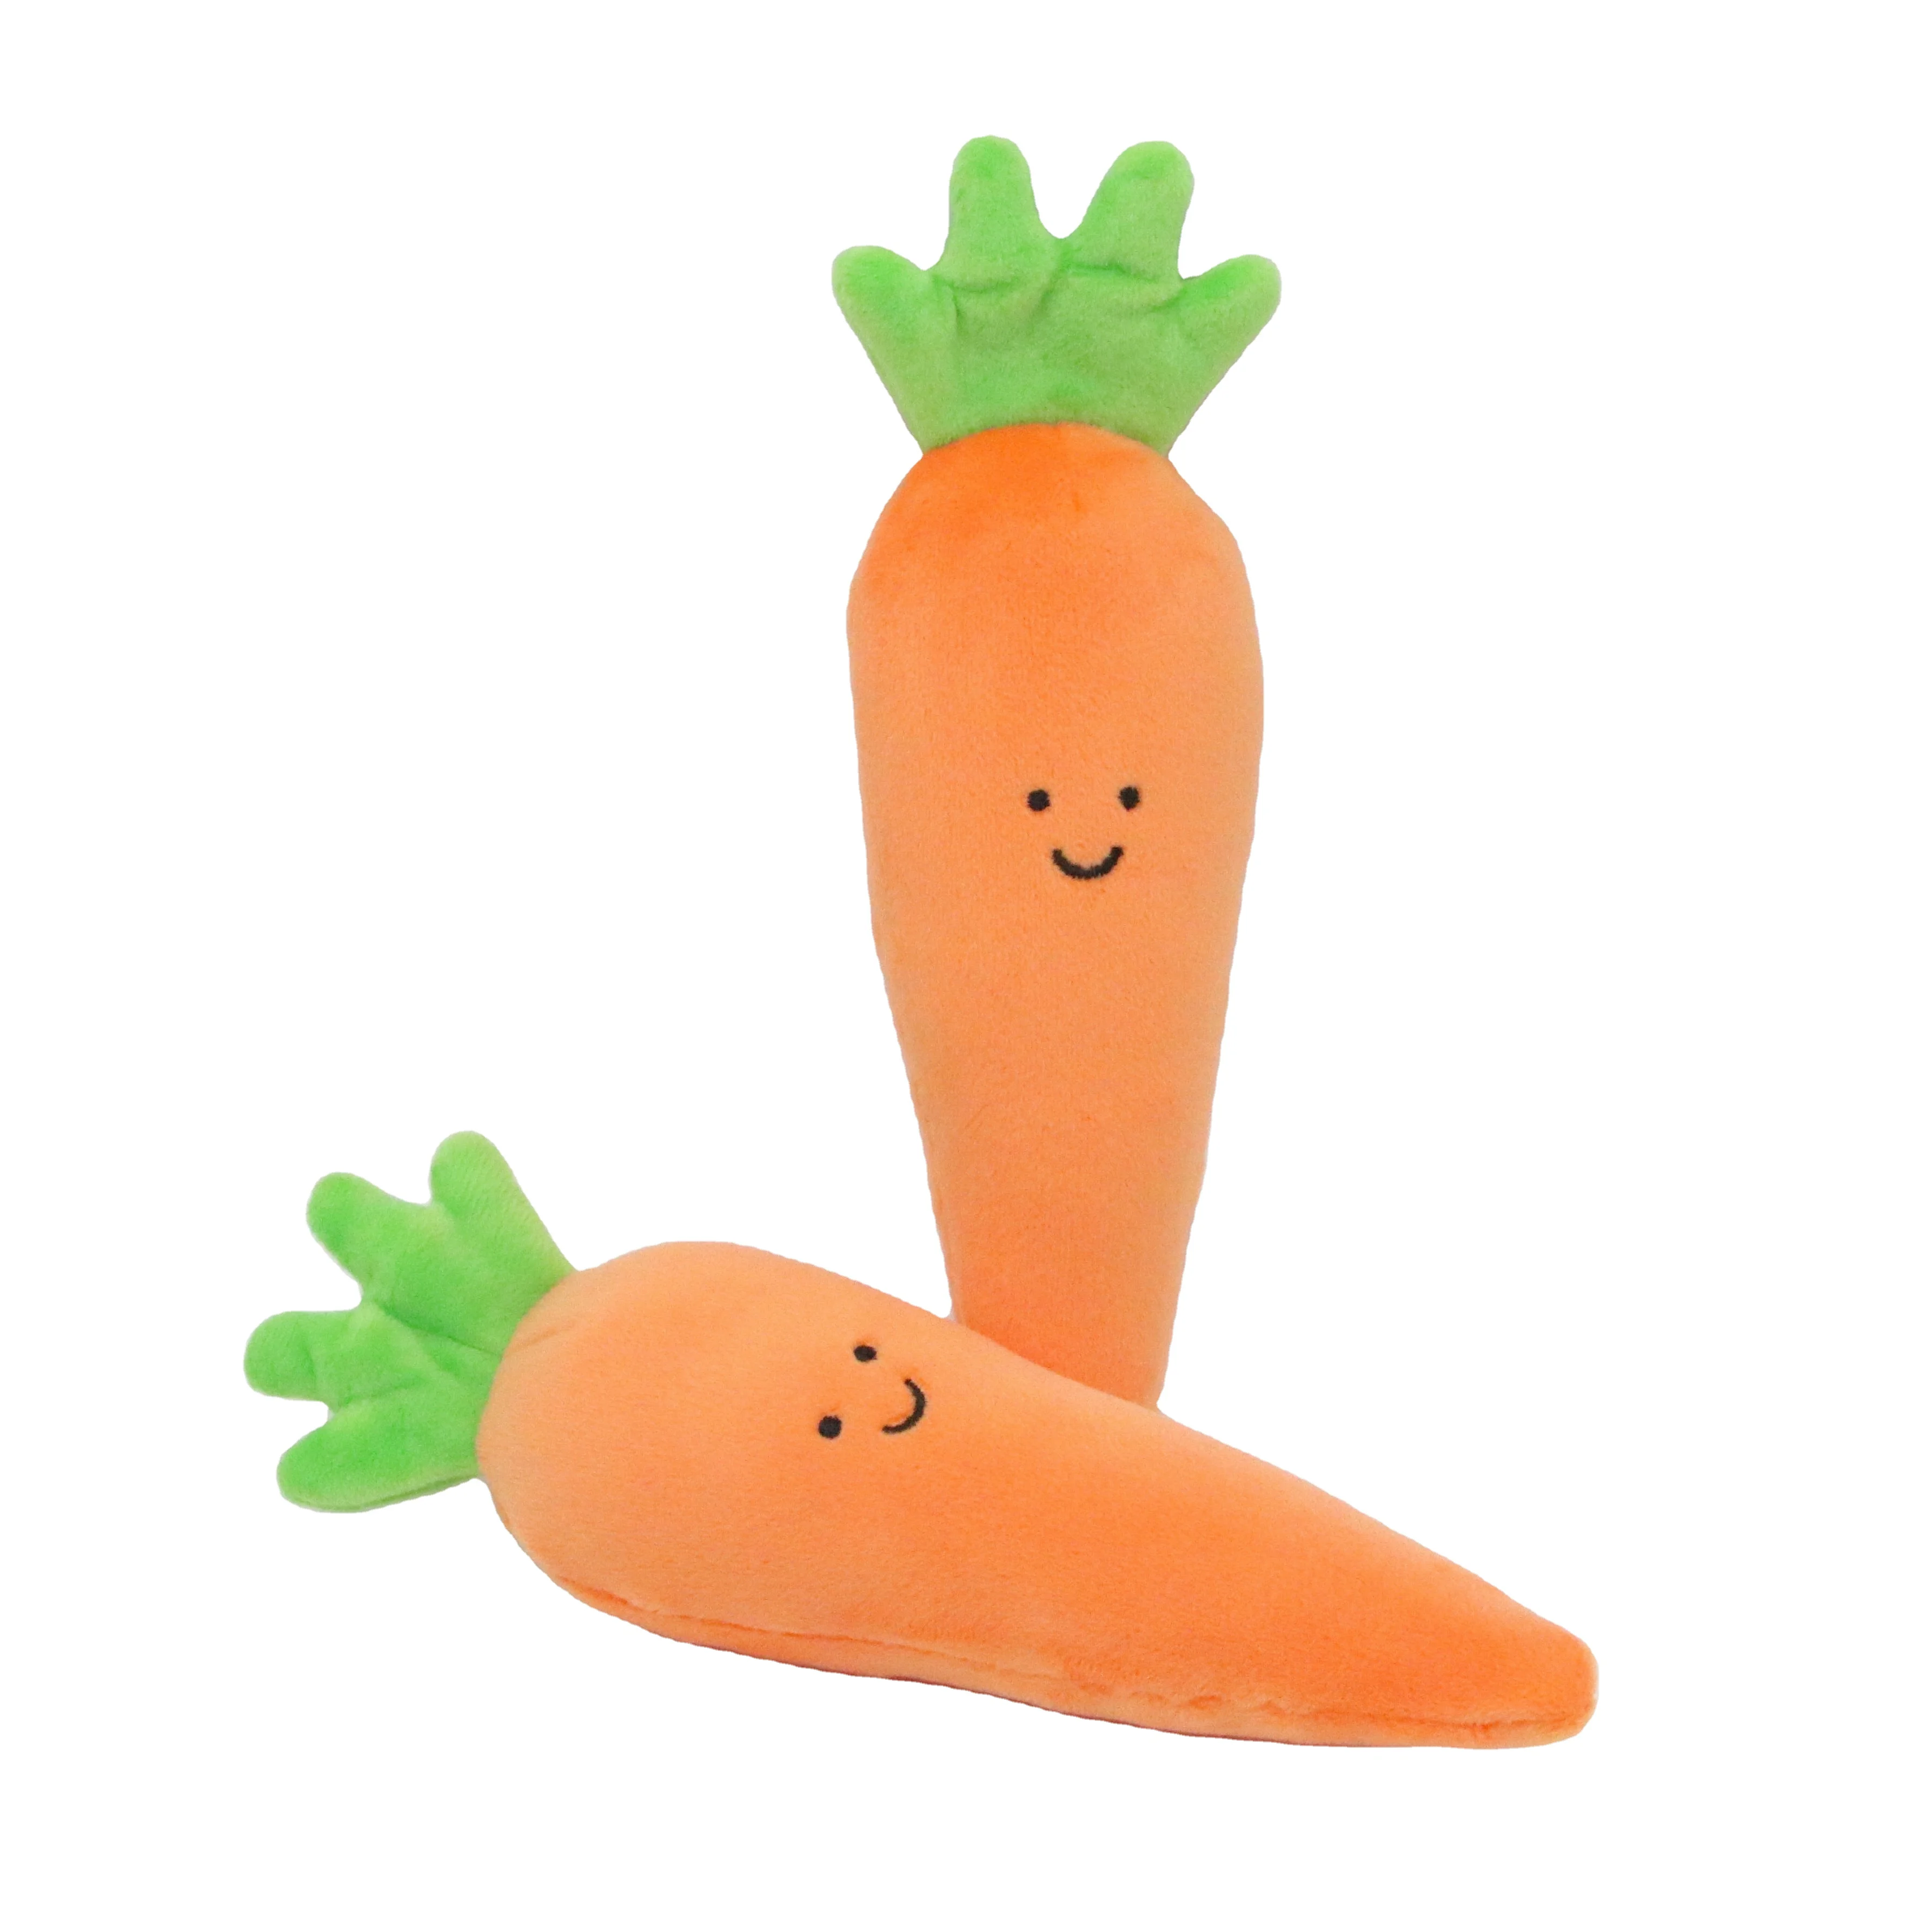 

Durable Tough Plush Cute Vegetables Shape Pet Chew Carrot Toy for Dog Chew Bite, Customized